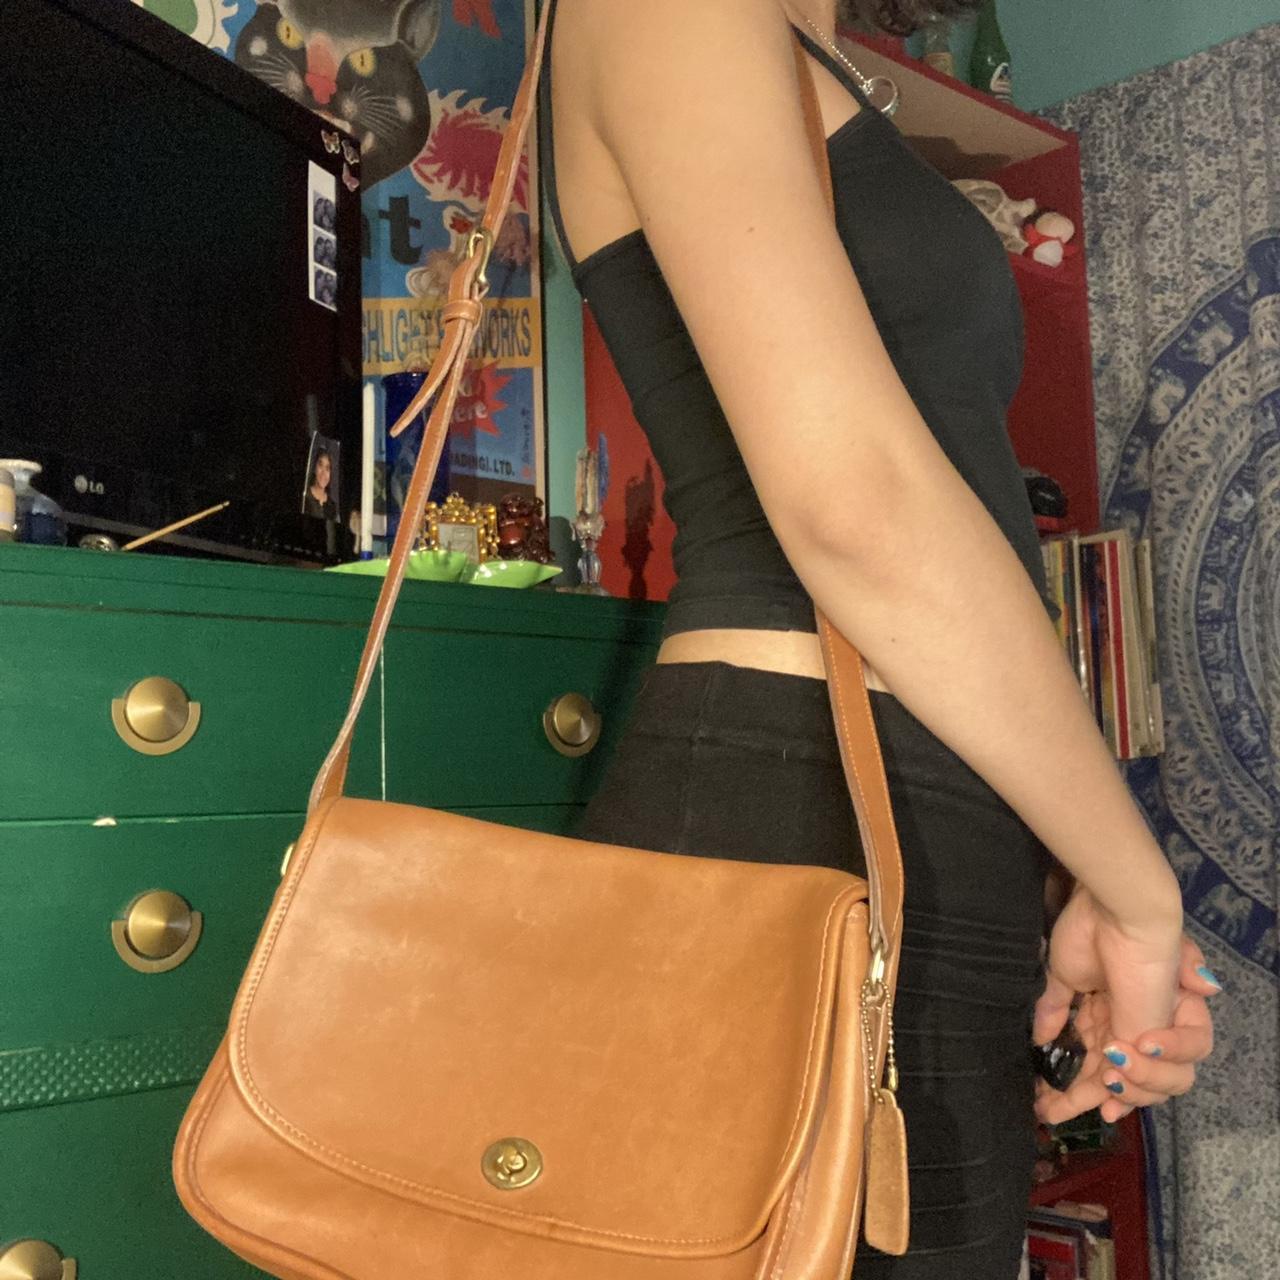 Obsessed 😍 this bag is called the “world traveler” from @vintagebohob